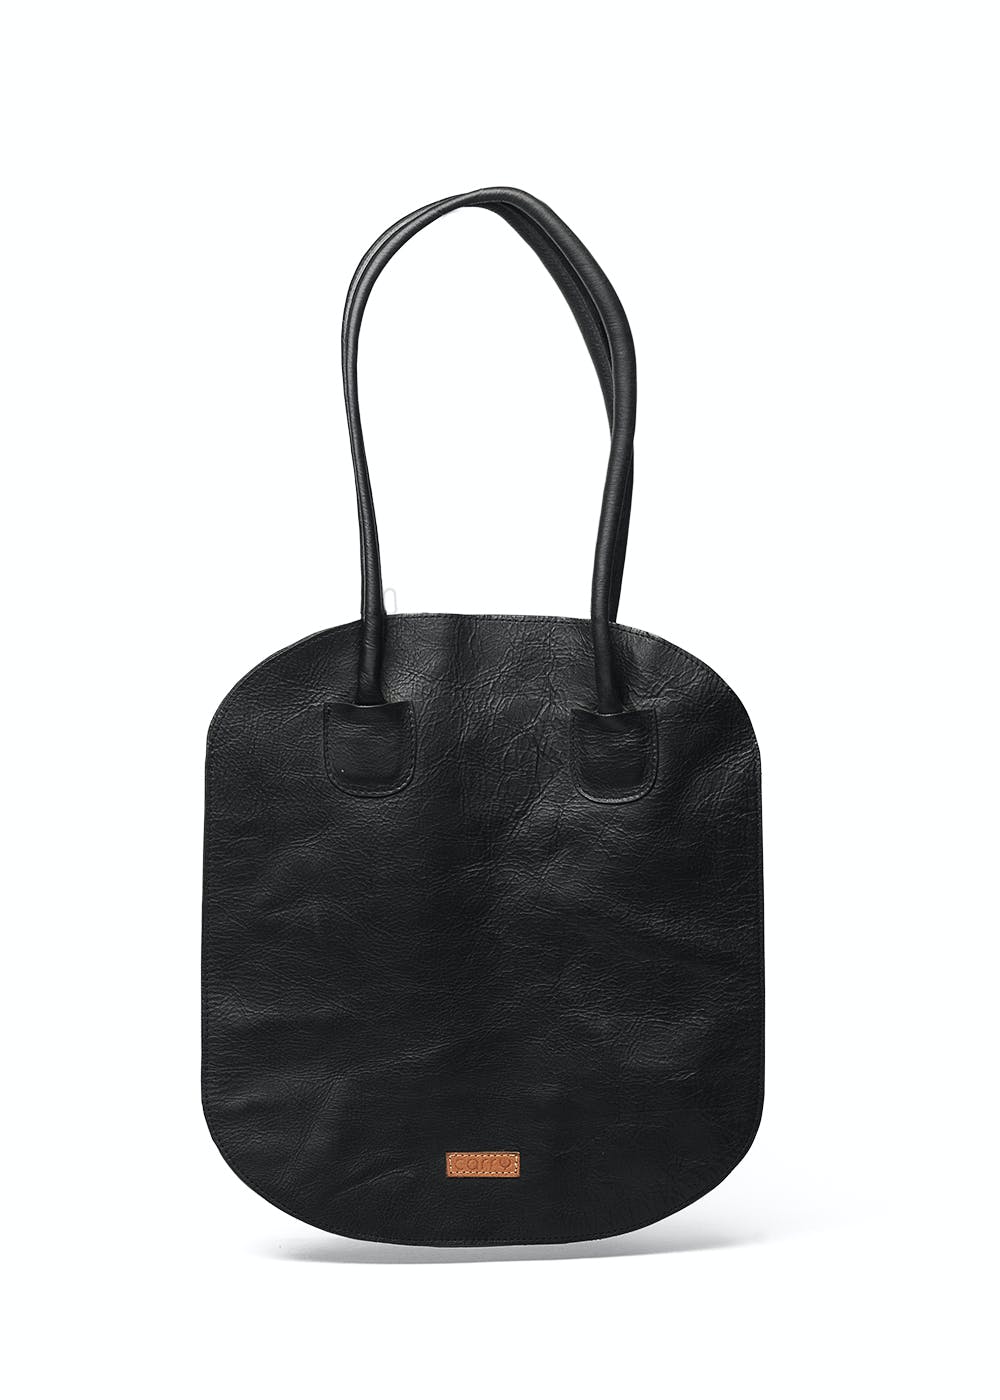 Get Sleek Classic Leather Tote at ₹ 5500 | LBB Shop